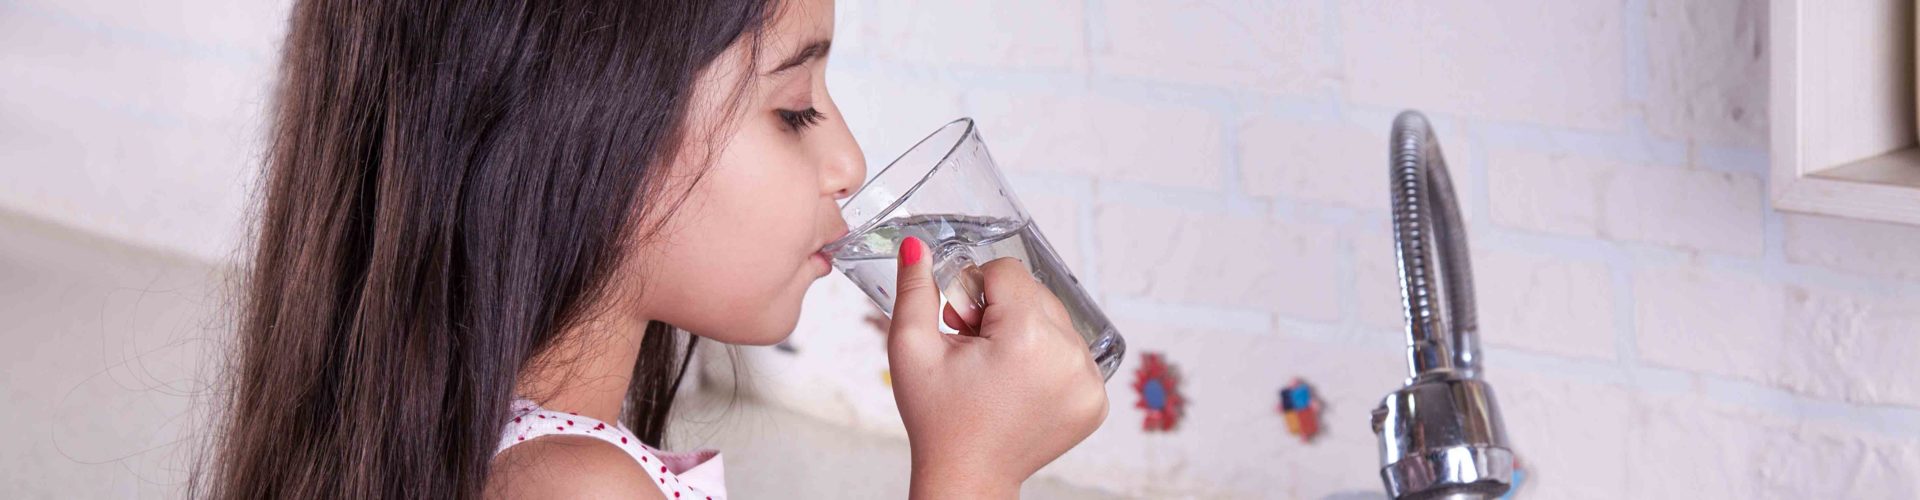 girl drinking a glass of water